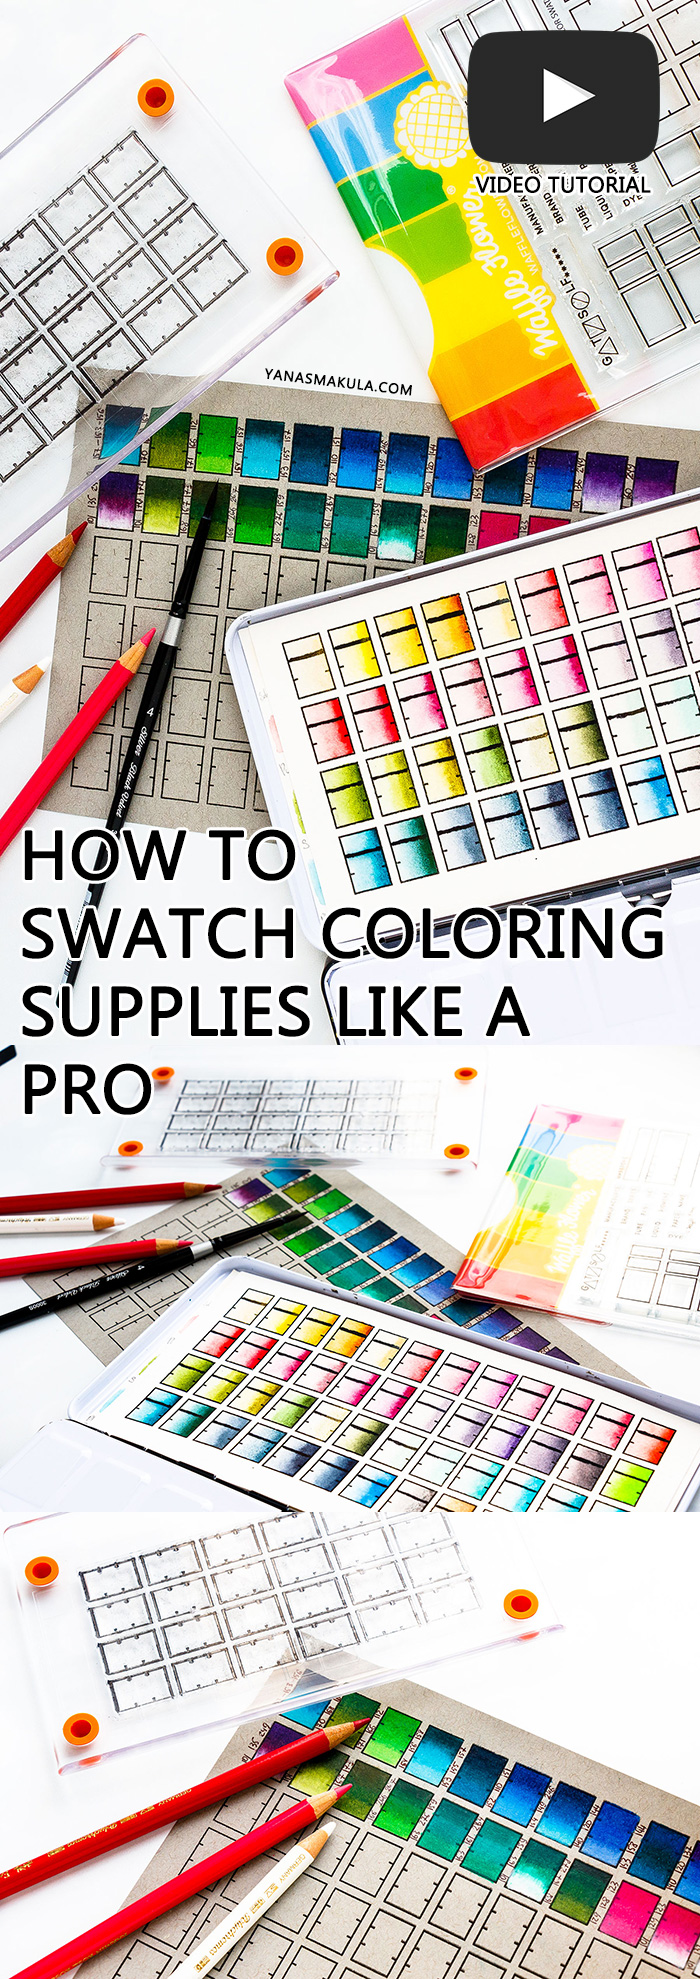 How to Swatch Coloring Mediums like a PRO using Swatching Stamps from Waffle Flower Crafts. Examples show Daniel Smith watercolor swatches and Faber Castell Polychromos Pencils swatches. #colorswatches #howtoswatchwatercolor #howtoswatchcoloredpencils